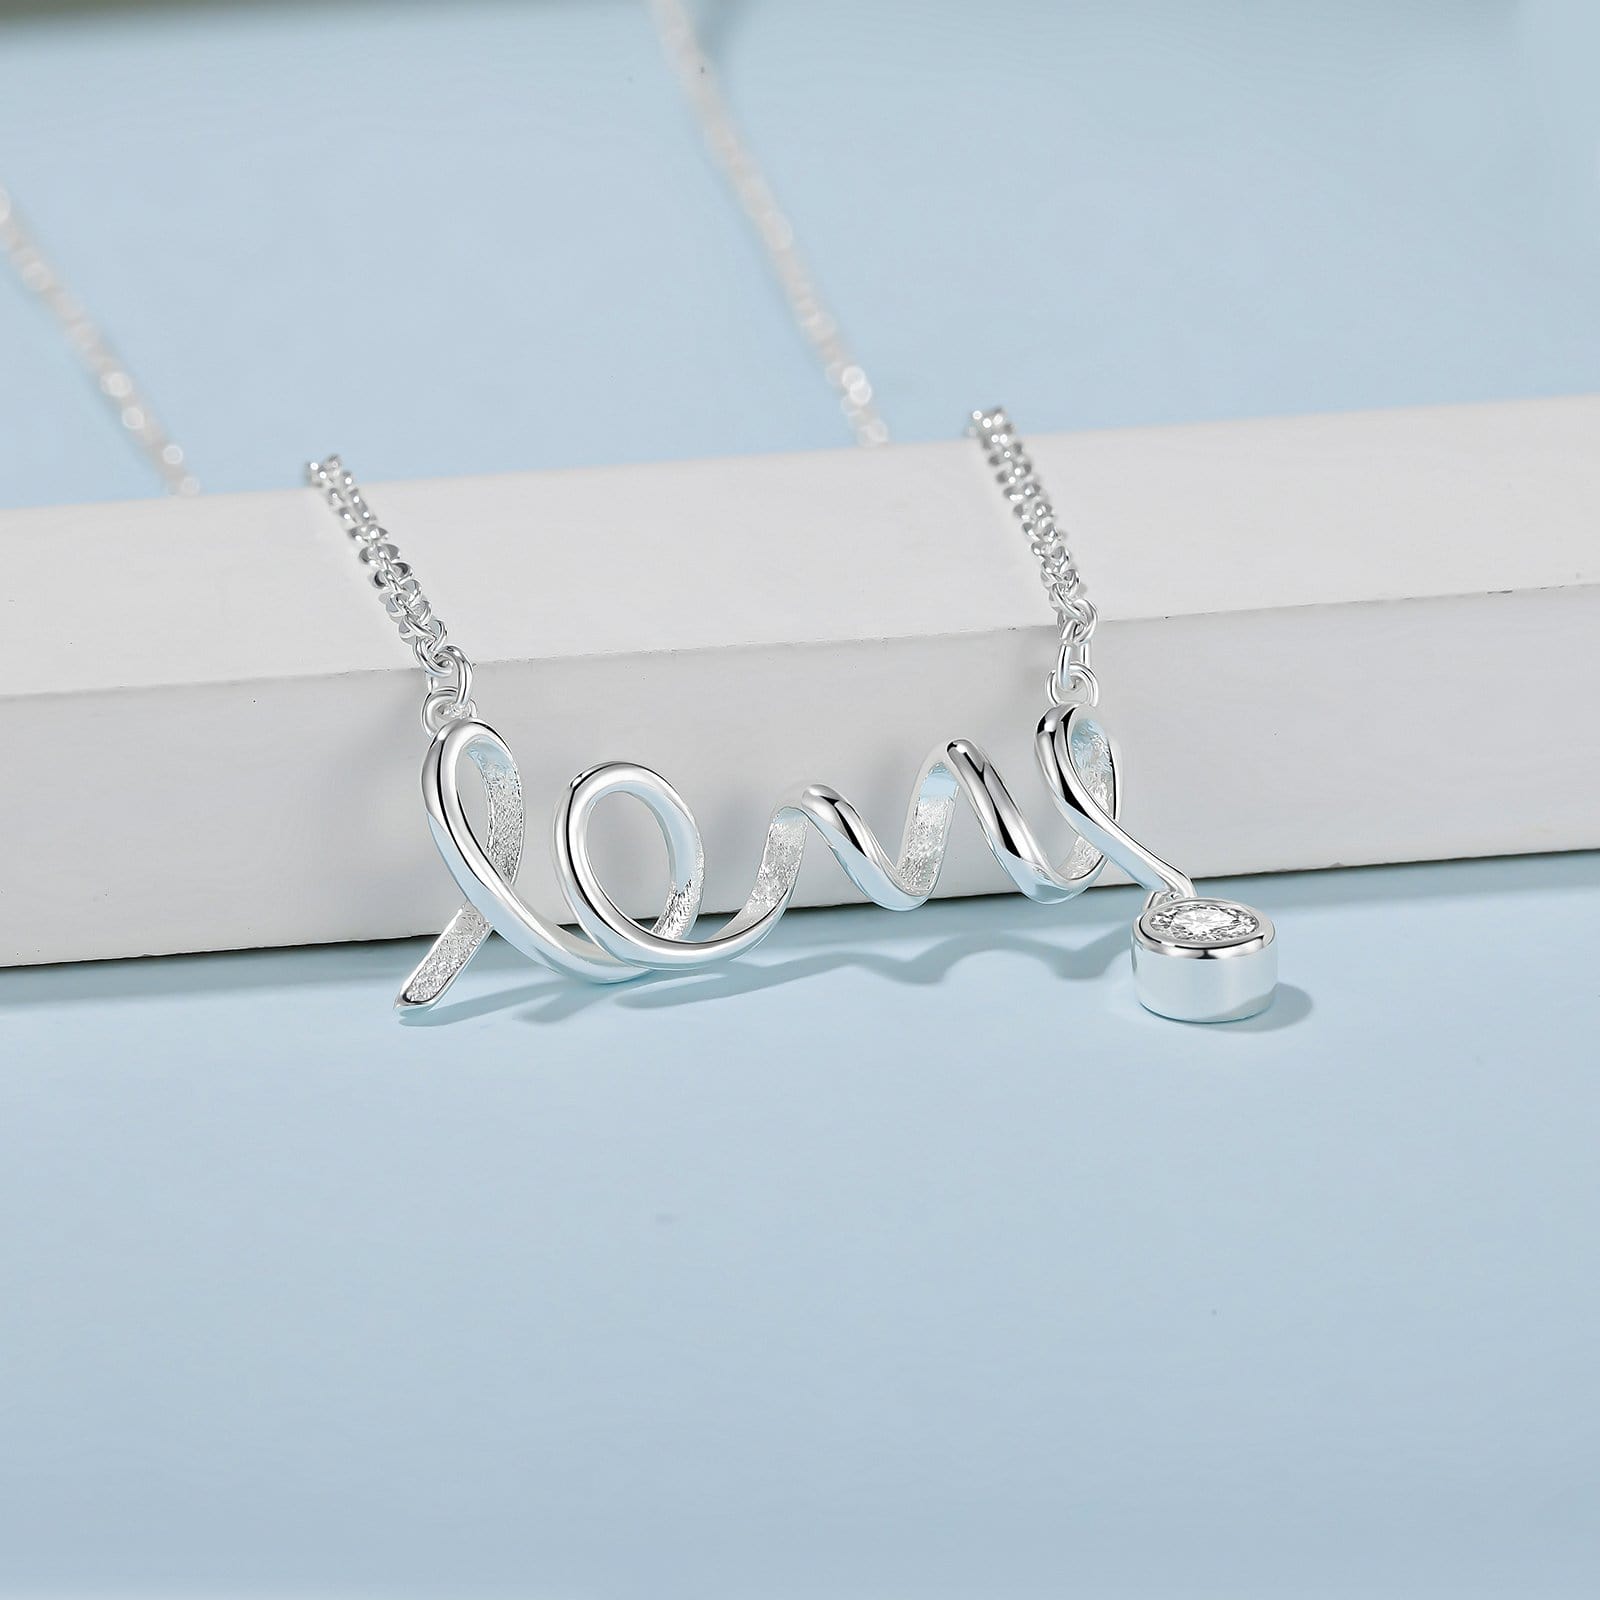 Necklaces To My Mom - Thank You Love Pendant Necklace GiveMe-Gifts